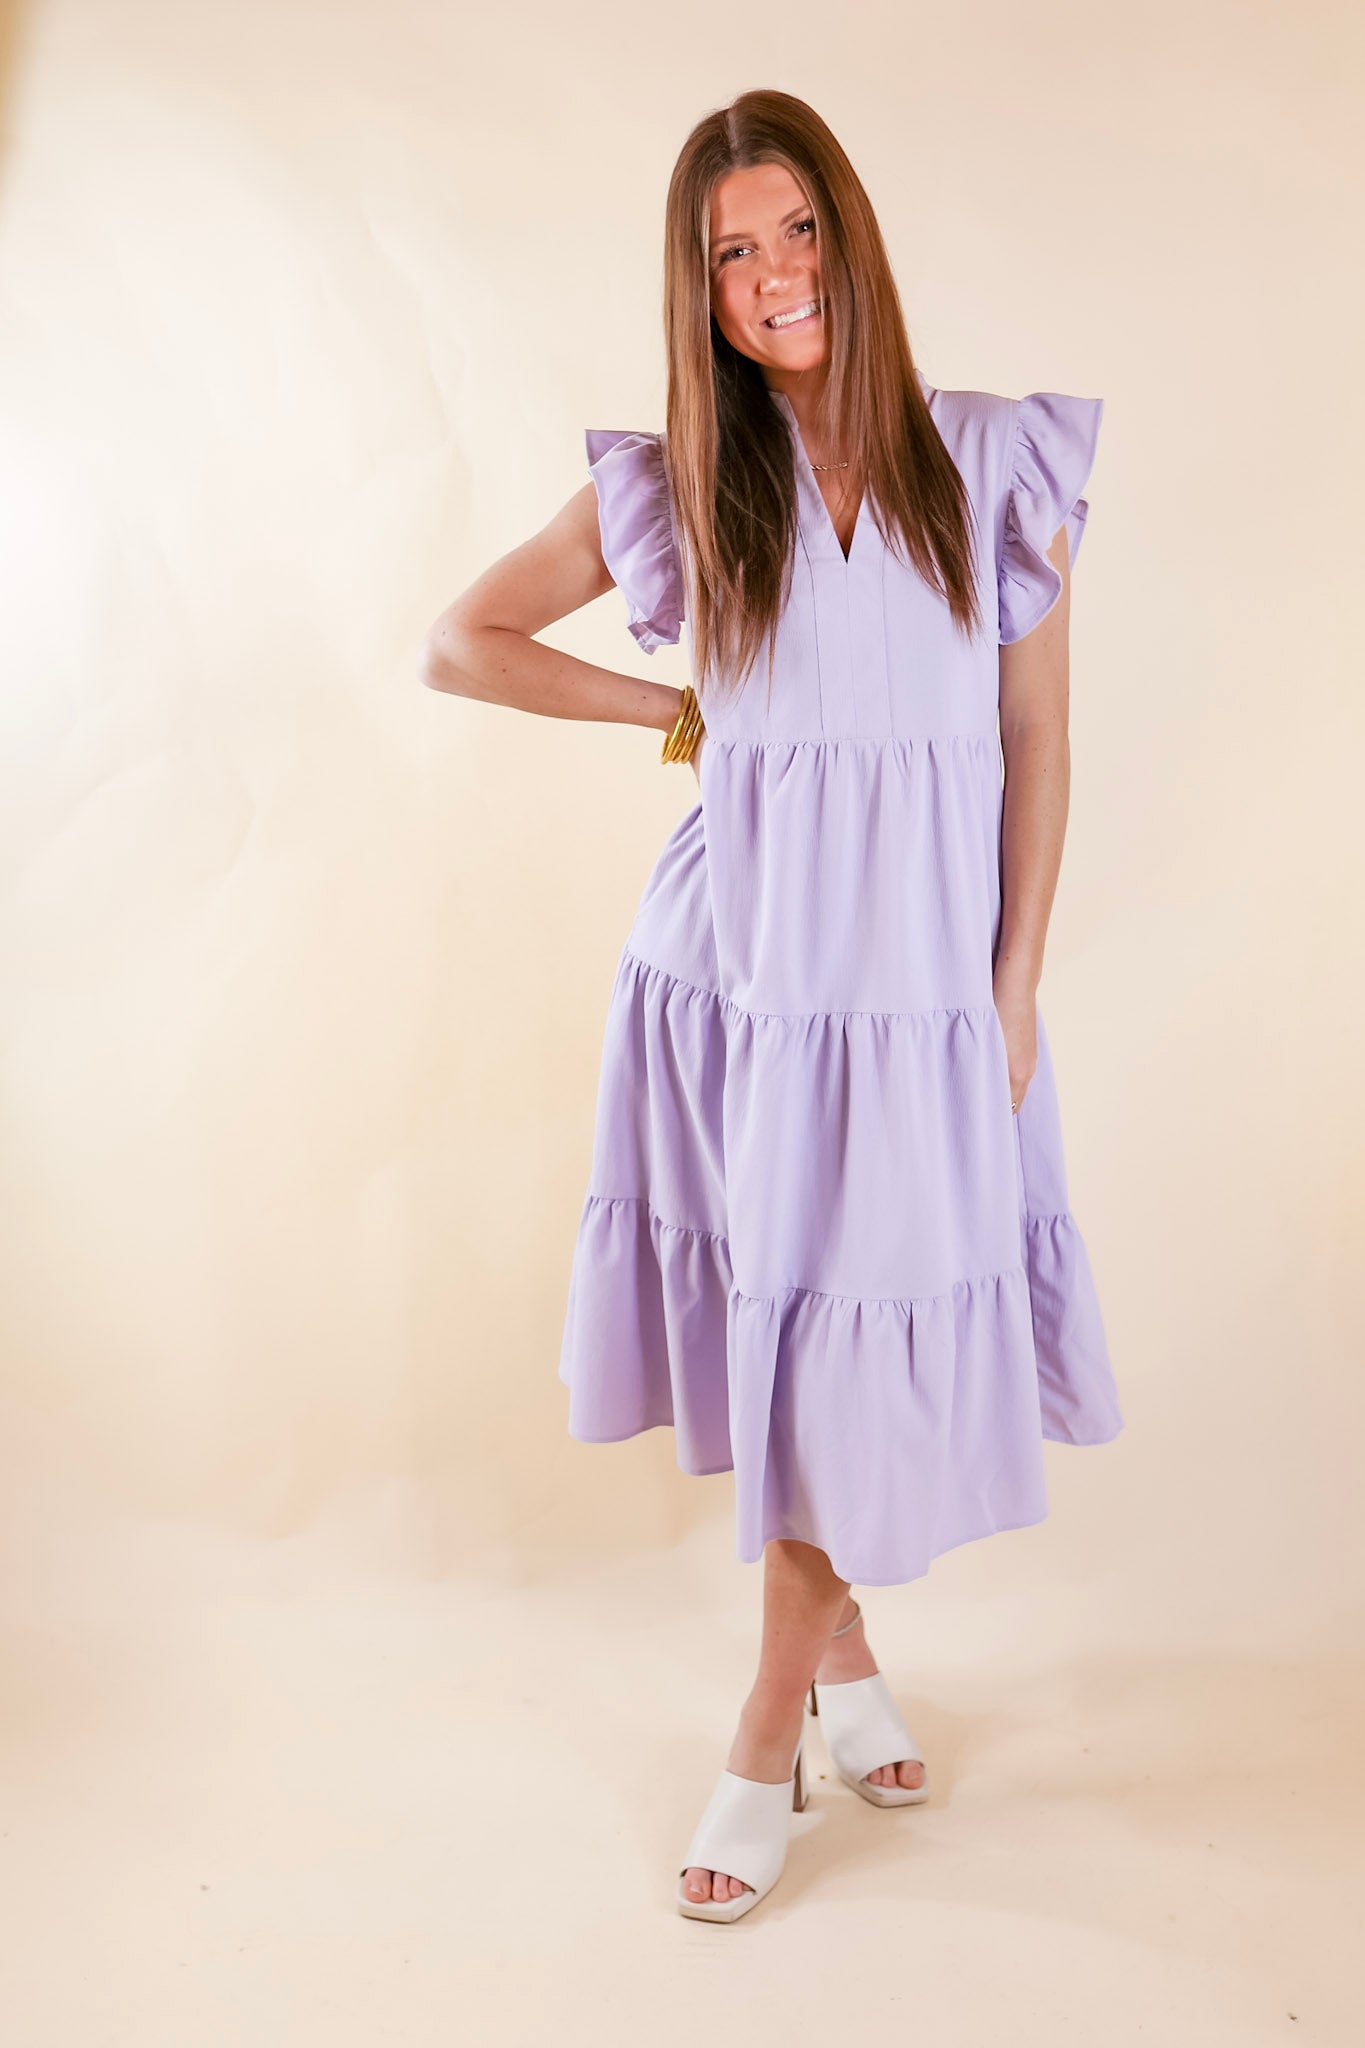 A relaxed fit midi dress in lavender. The dress has a V neckline, short ruffled sleeves, pockets, and a tiered skirt. Item is pictured on a pale pink background